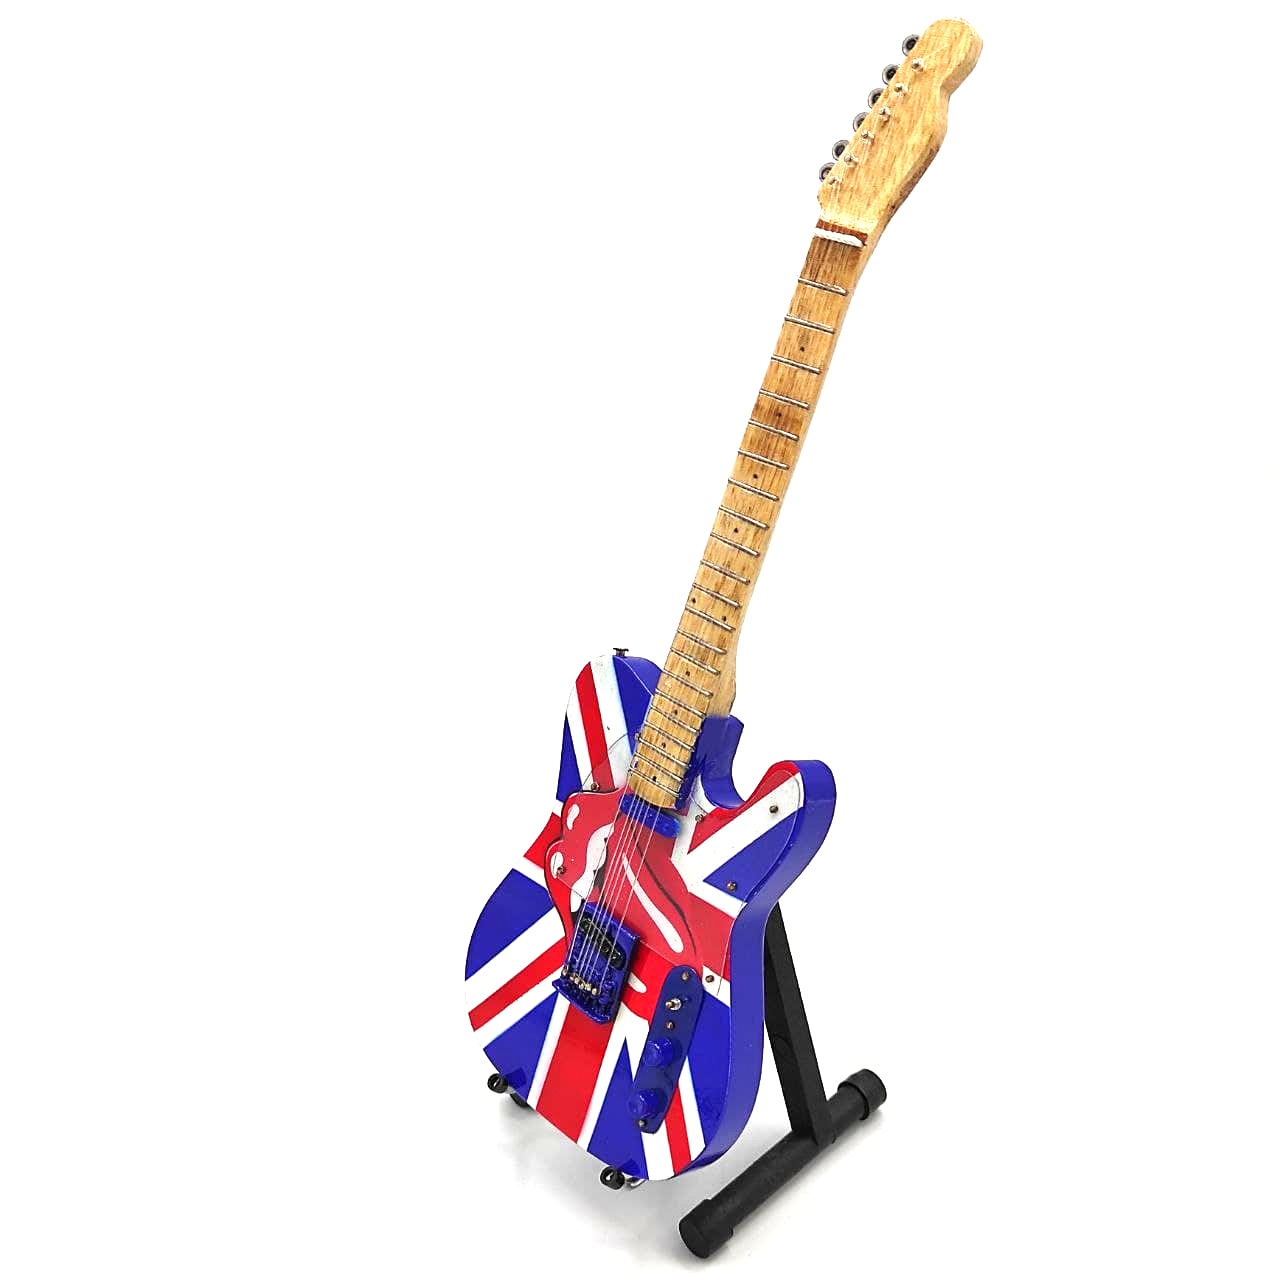 Mini guitar - Rolling Stones - Keith Richards - UK & Tongue, scale 1: 4; MGT-2301B